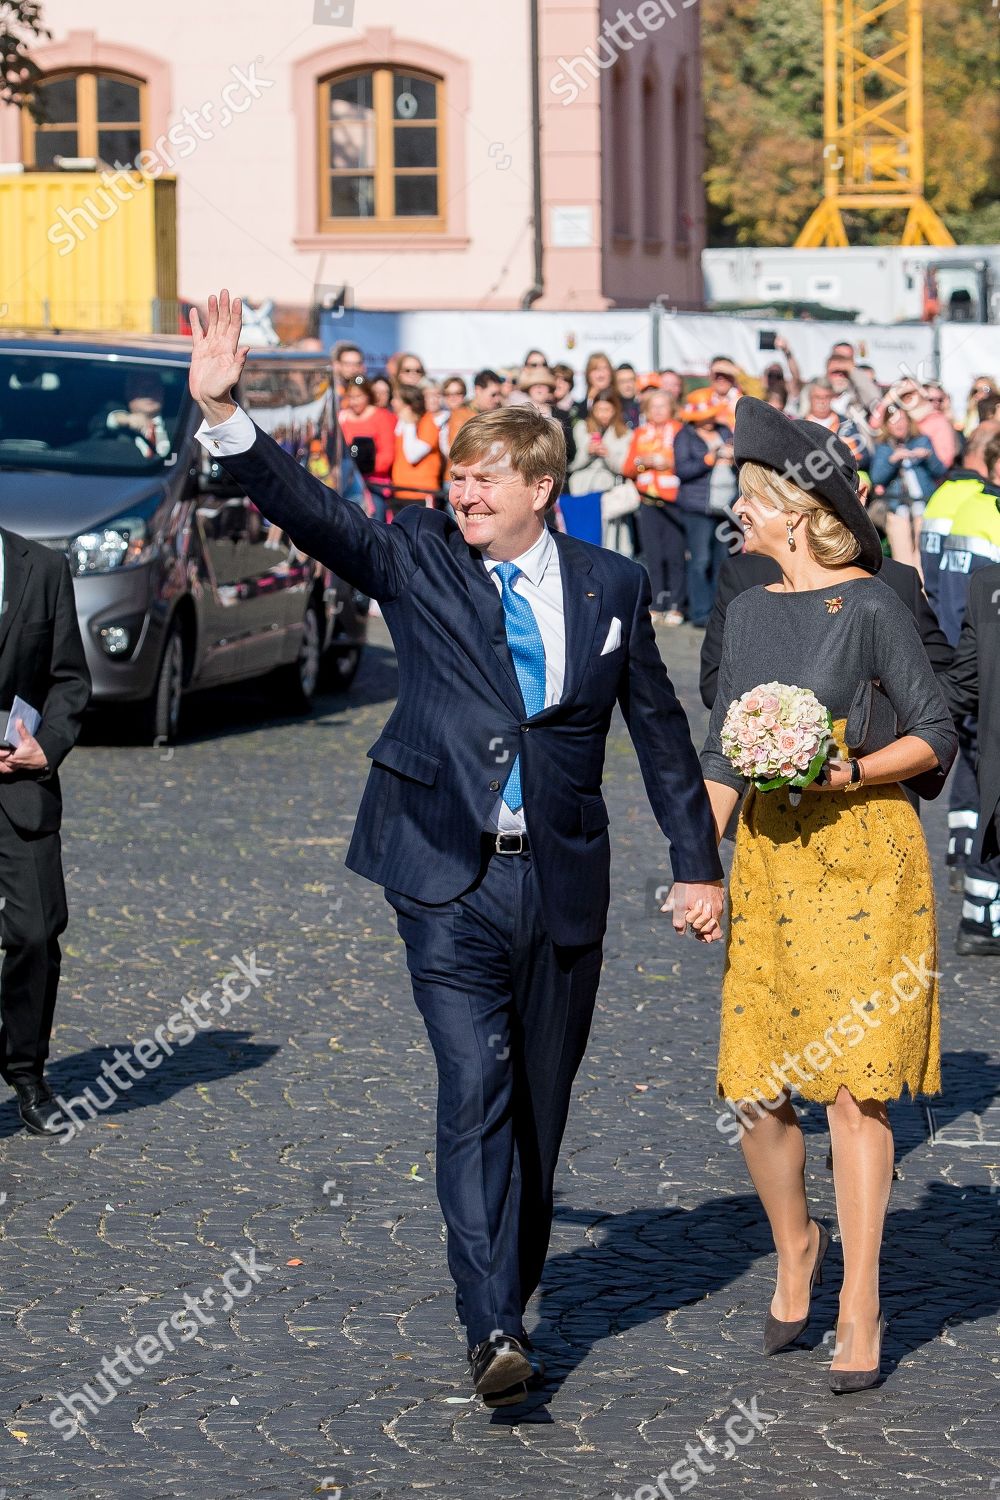 king-willem-alexander-and-queen-maxima-visit-to-germany-shutterstock-editorial-9921325l.jpg